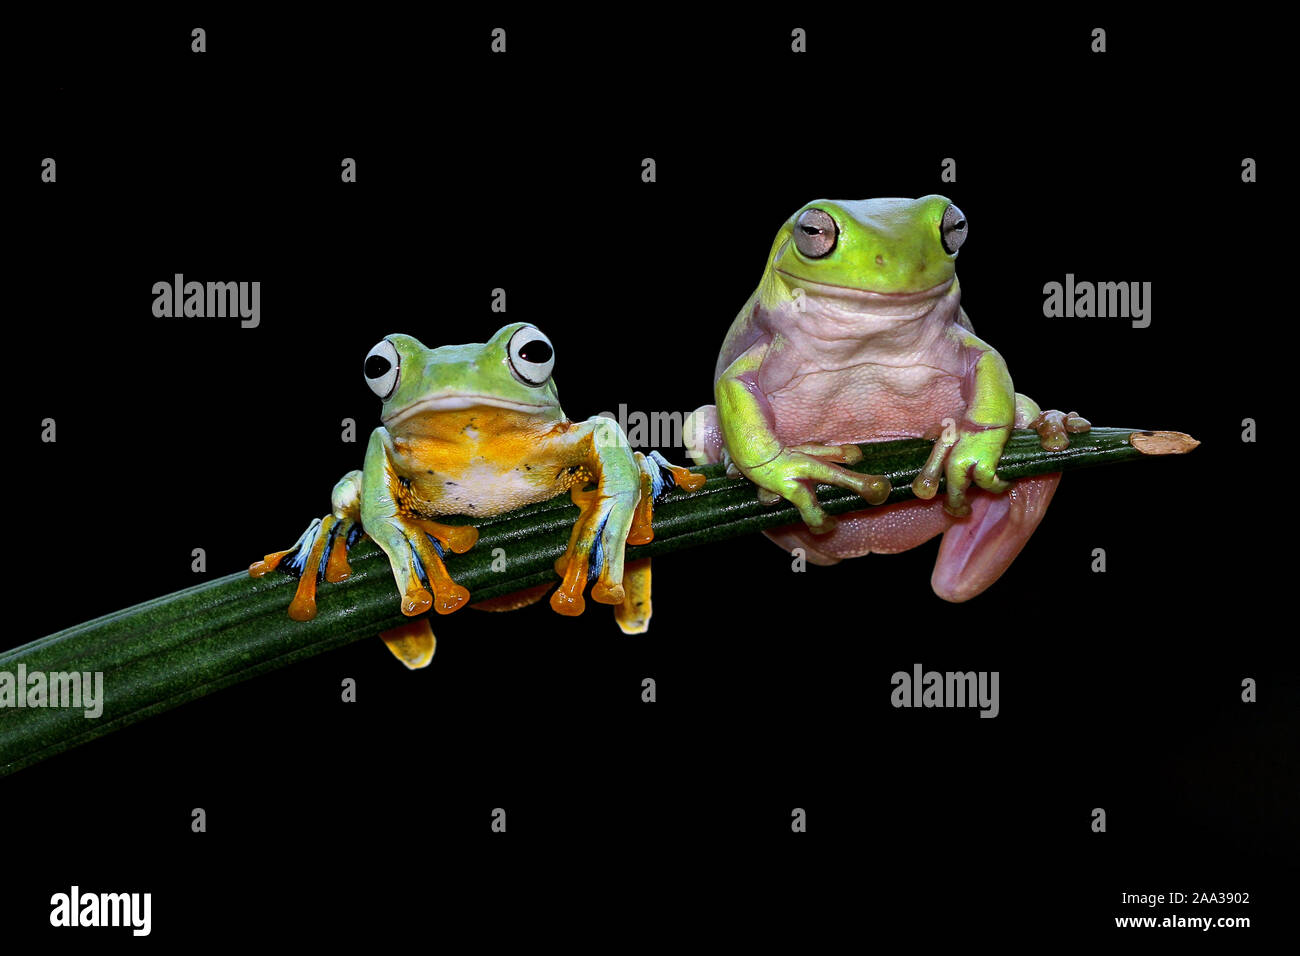 Flying frog and dumpy tree frog on a branch, Indonesia Stock Photo